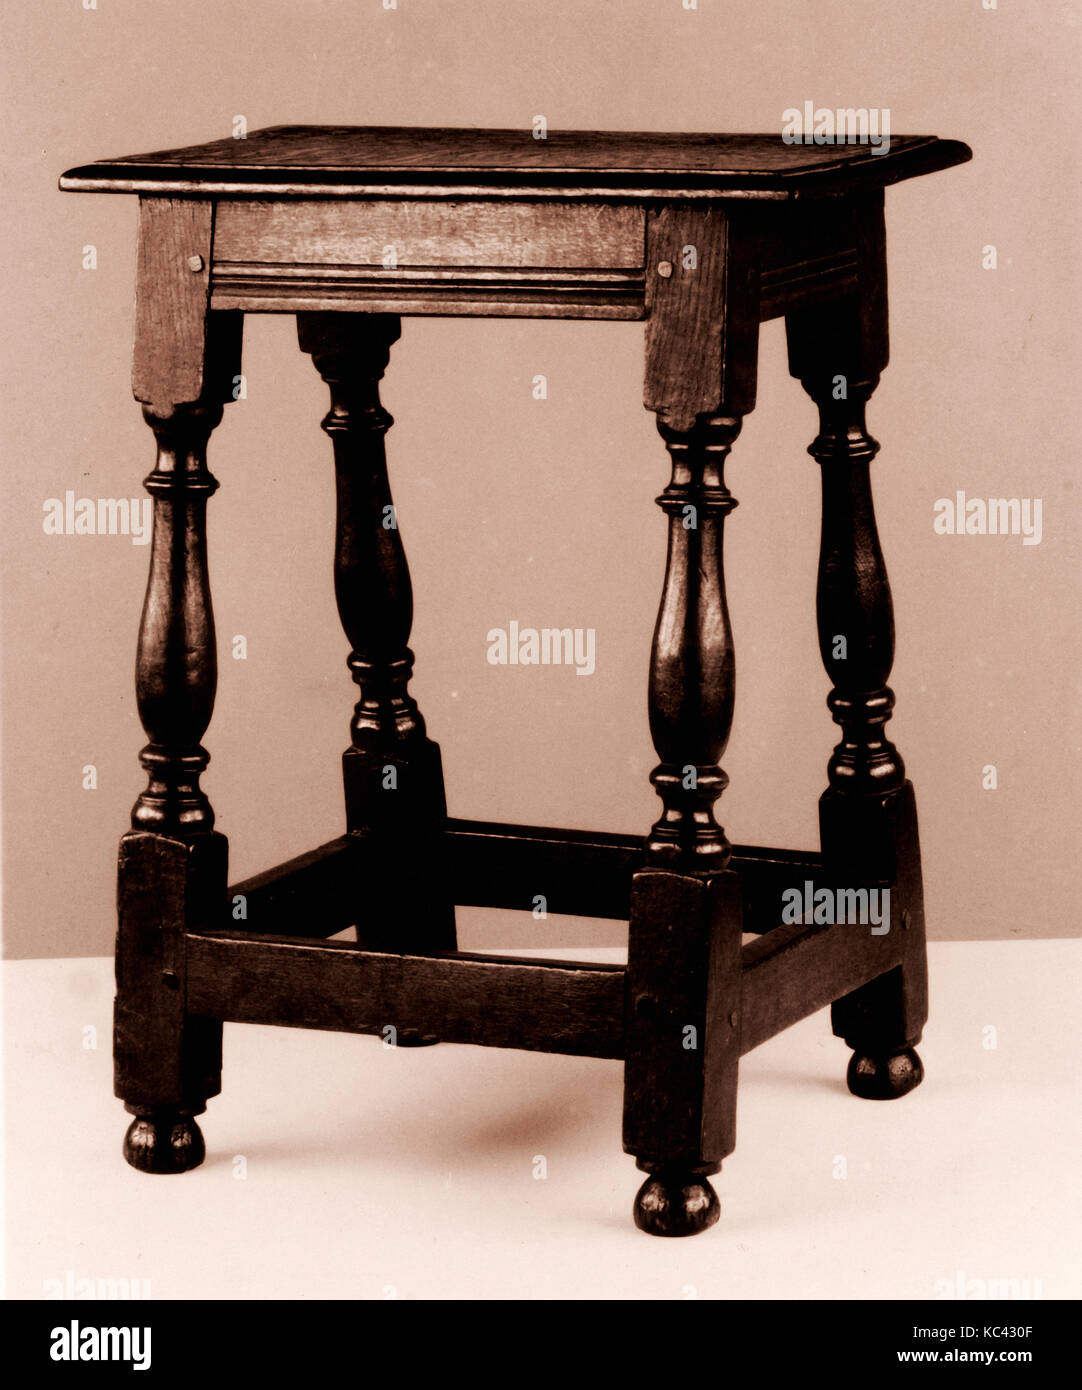 Joint stool, 1650–1700, Made in England, British, White oak, 22 1/8 x 17 7/8 x 13 1/8 in. (56.2 x 45.4 x 33.3 cm), Furniture Stock Photo